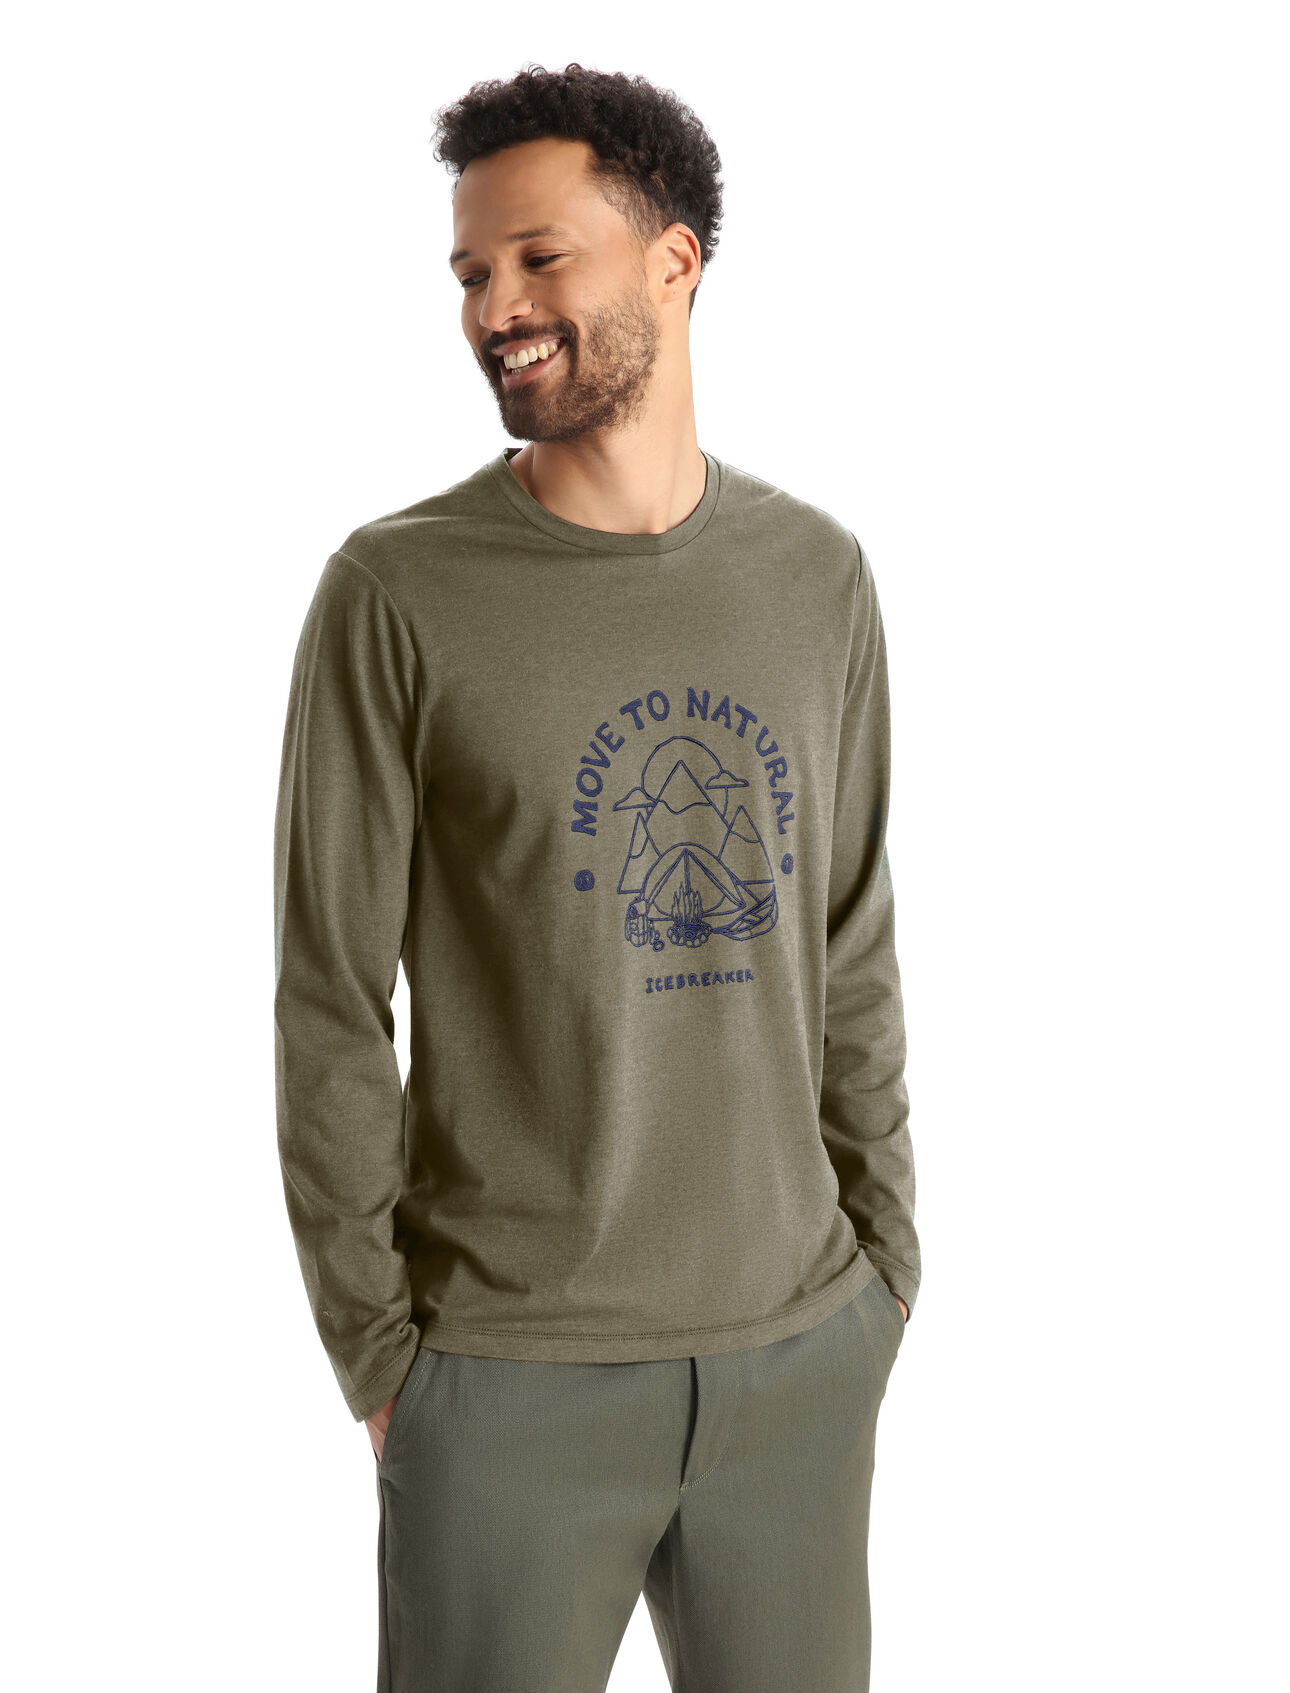 Mens Merino Central Classic Long Sleeve T-Shirt Canopy Camper A versatile, everyday tee that goes anywhere in comfort, the Central Classic Long Sleeve Tee Canopy Camper features a sustainable blend of natural merino wool and soft organic cotton. The original graphic artwork features a unique mountain scene with the icebreaker mantra.